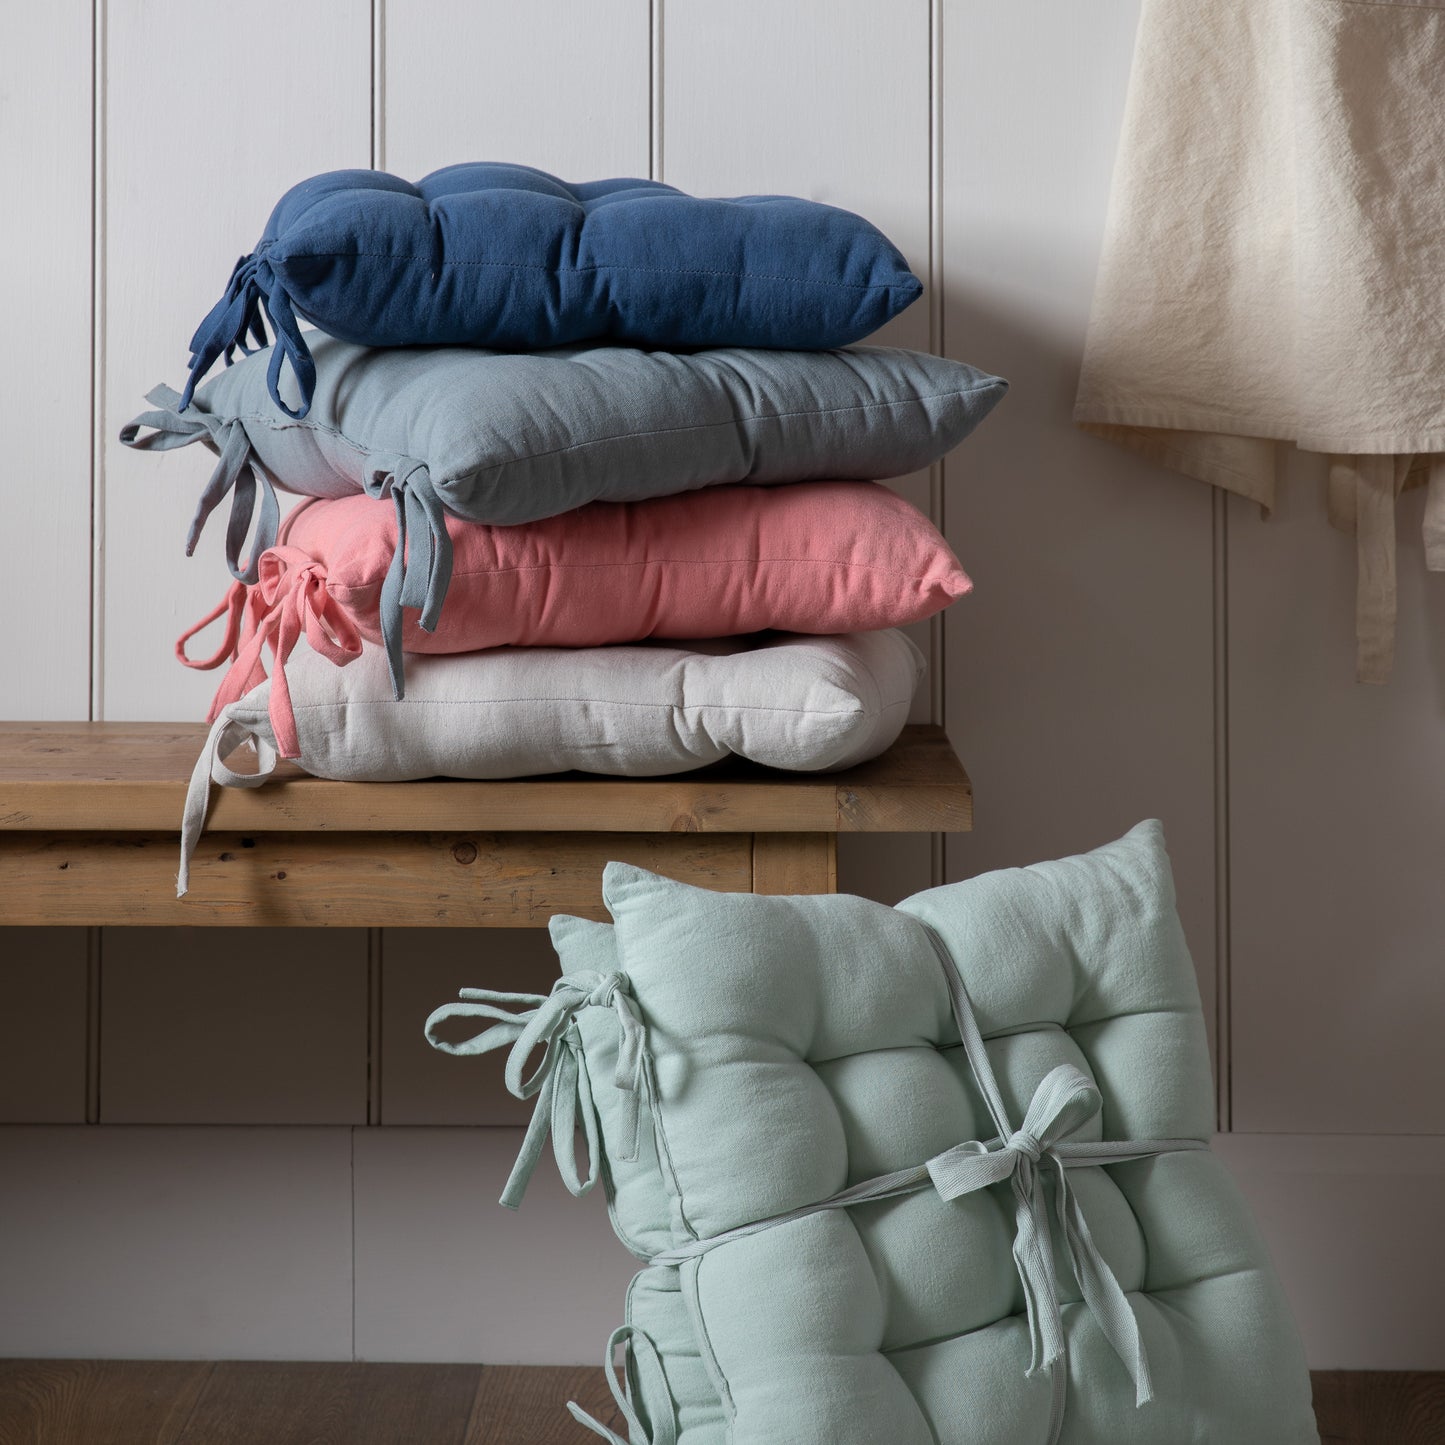 A stack of SC Plain Cotton Seatpad pillows on top of a wooden bench from Kikiathome.co.uk, adding a touch of interior decor to the home furniture.